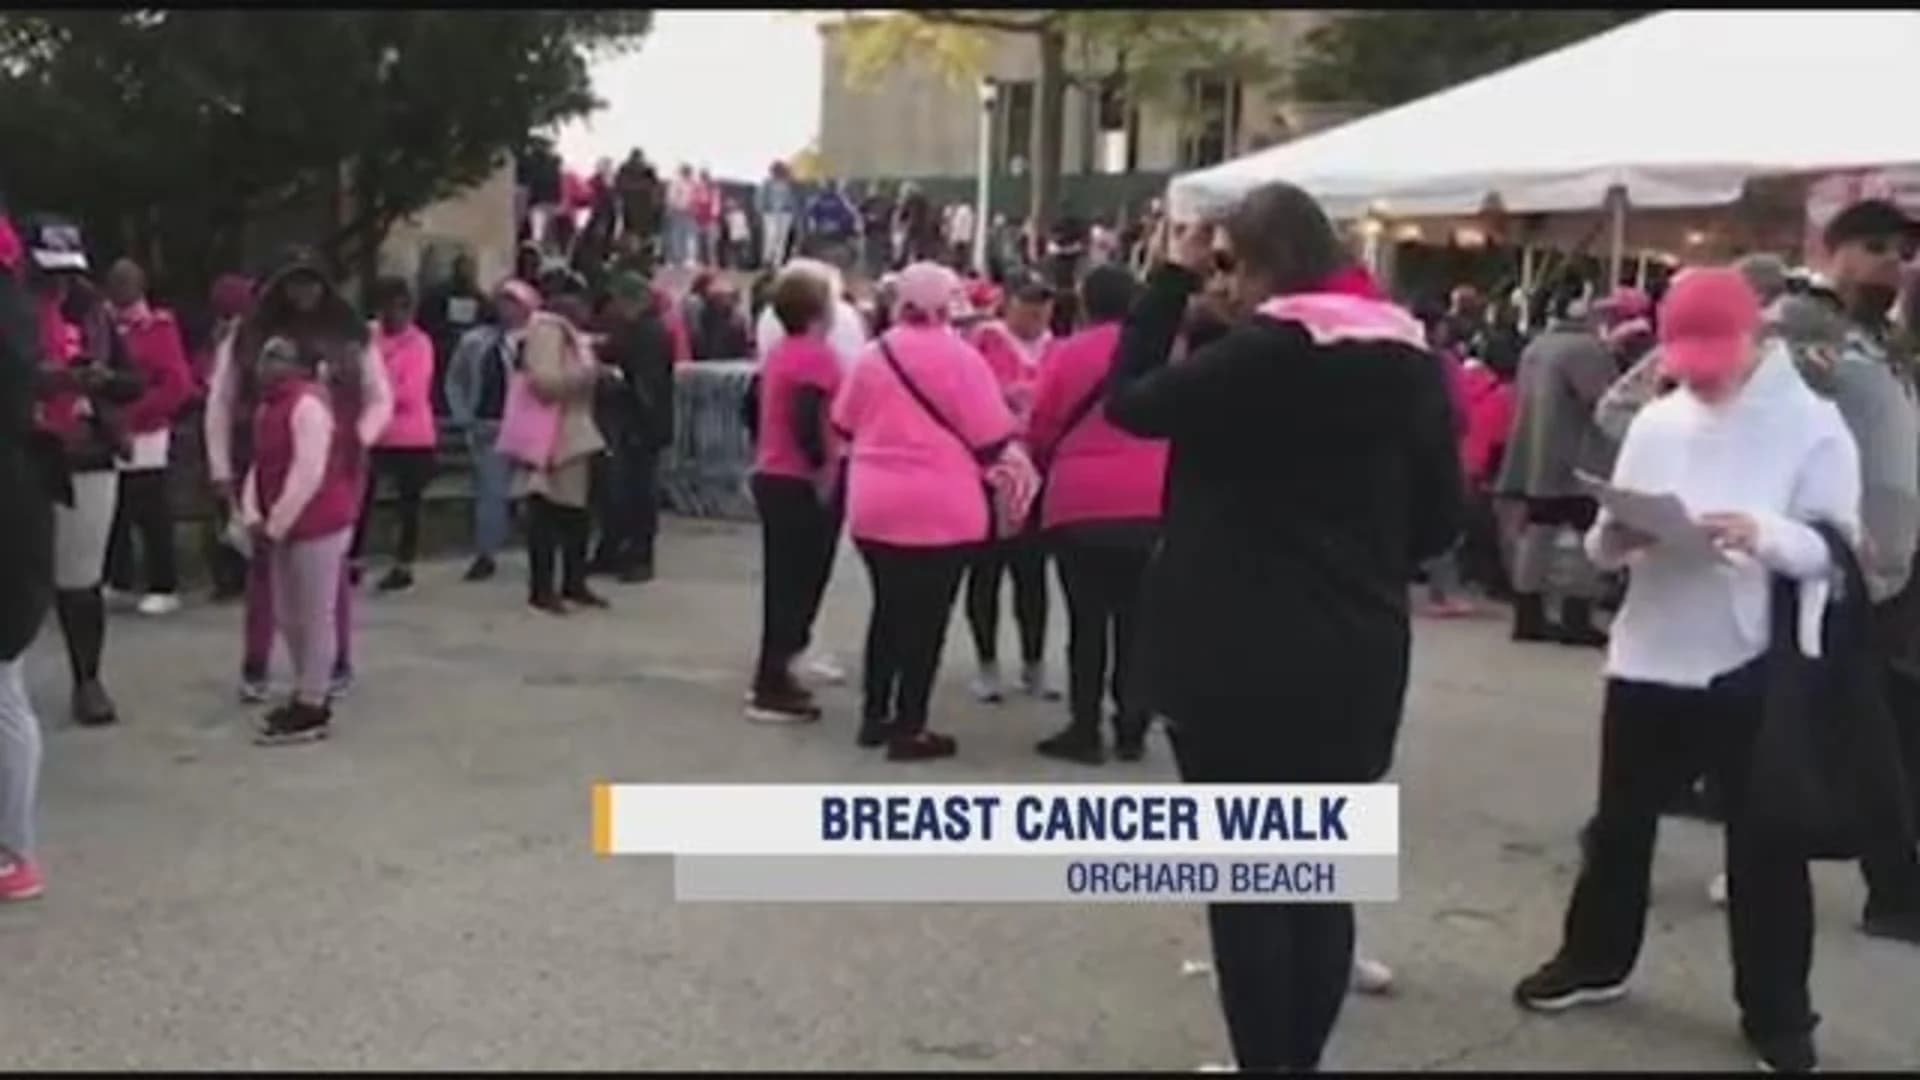 Thousands take part in breast cancer walk at Orchard Beach